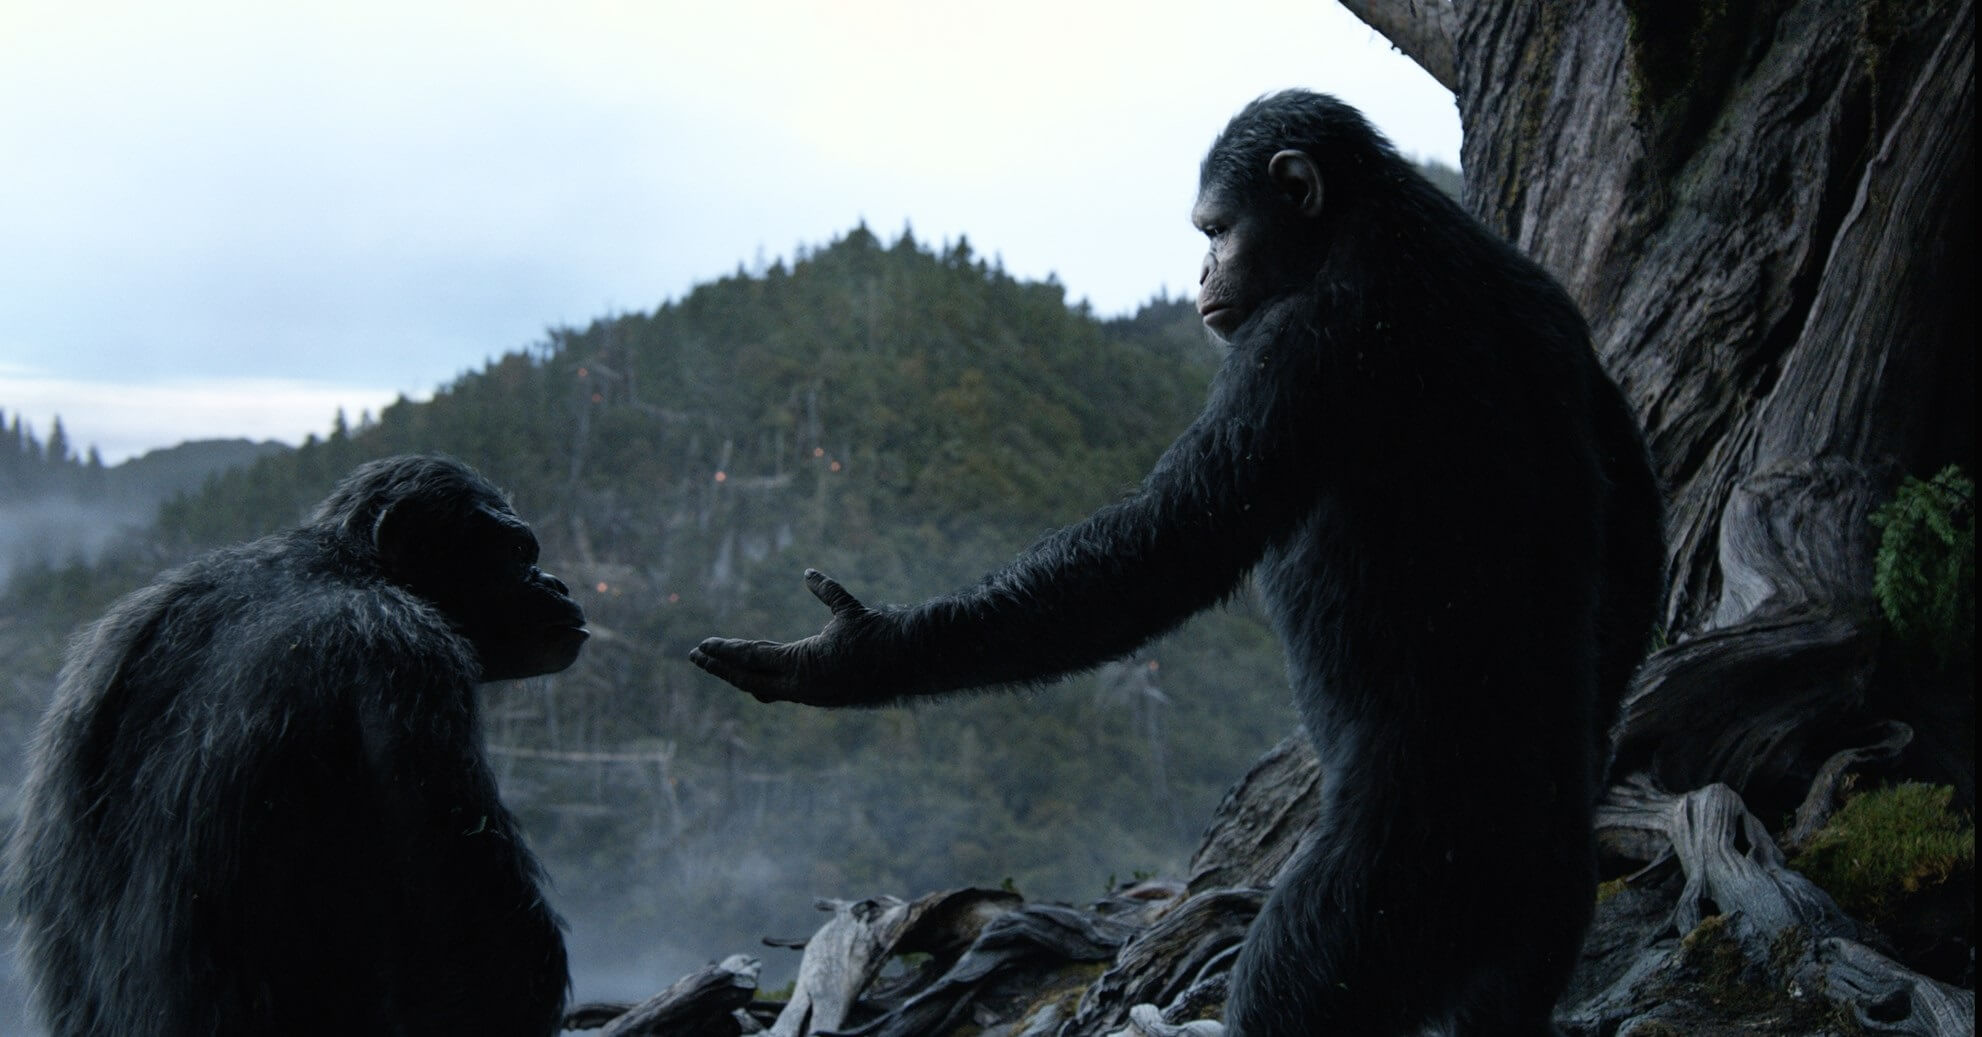 From the movie "The Planet of the Apes - Dawn". PR photo